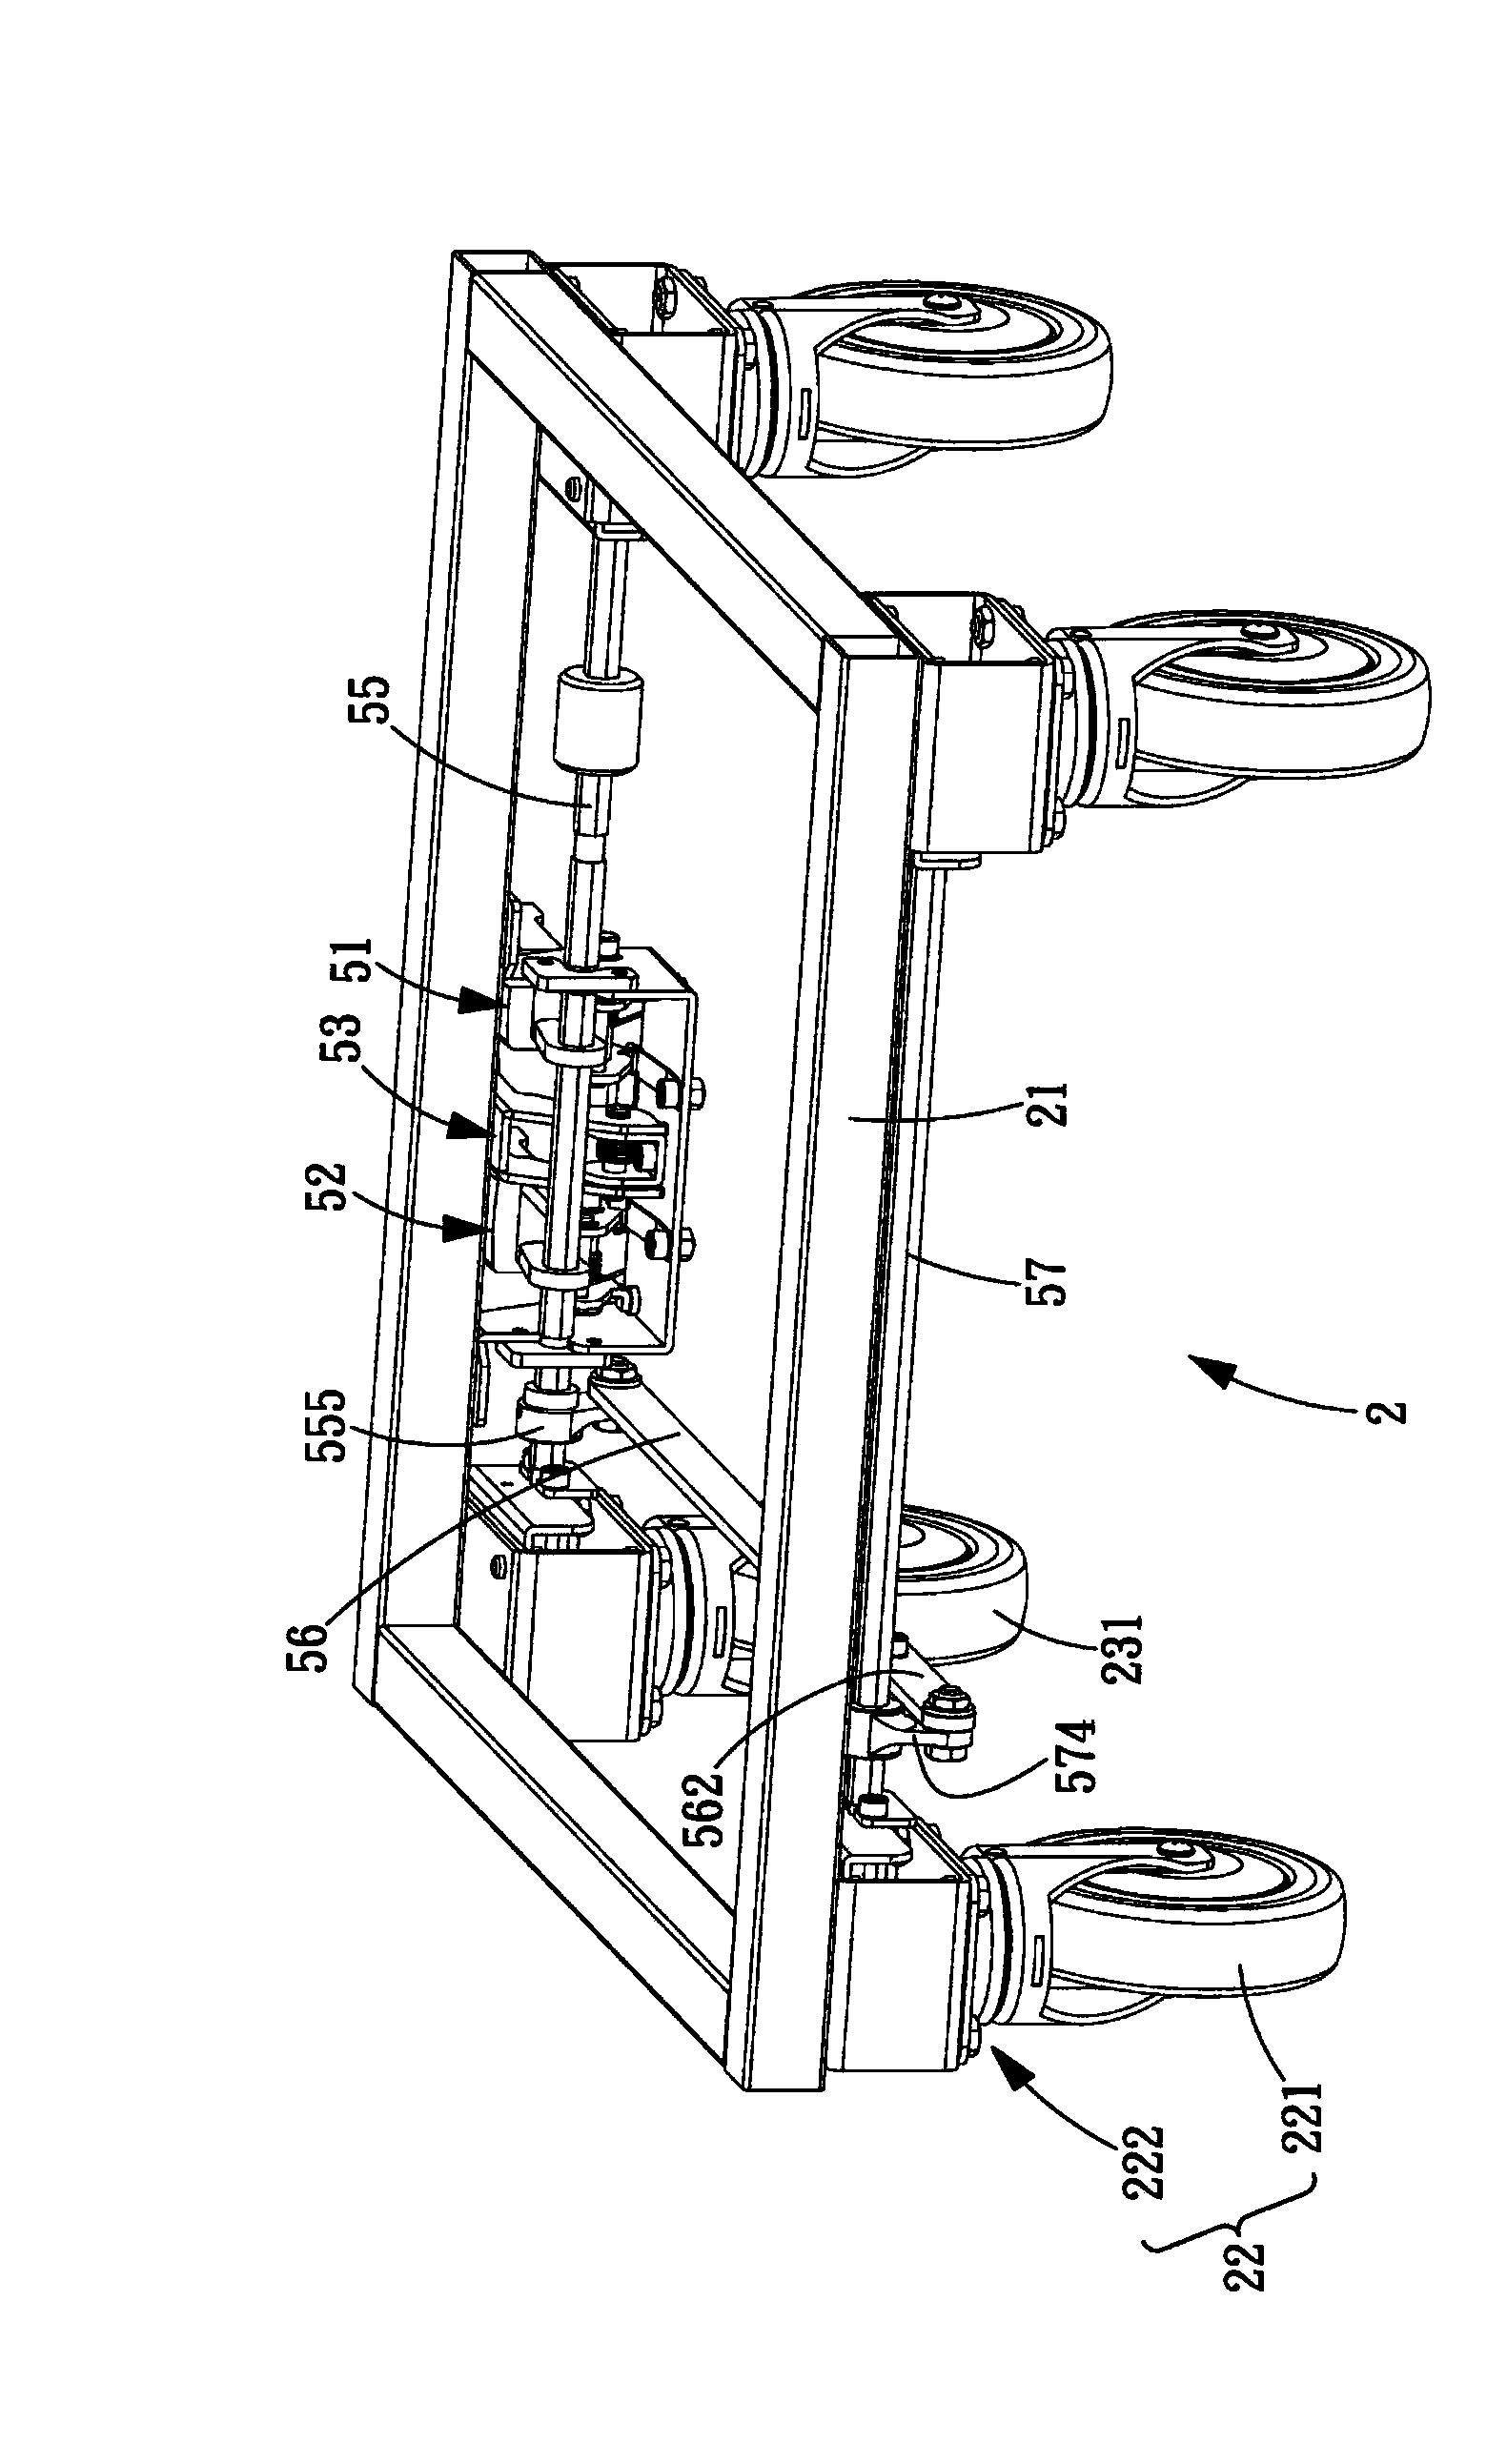 Orientating and positioning system of bogie